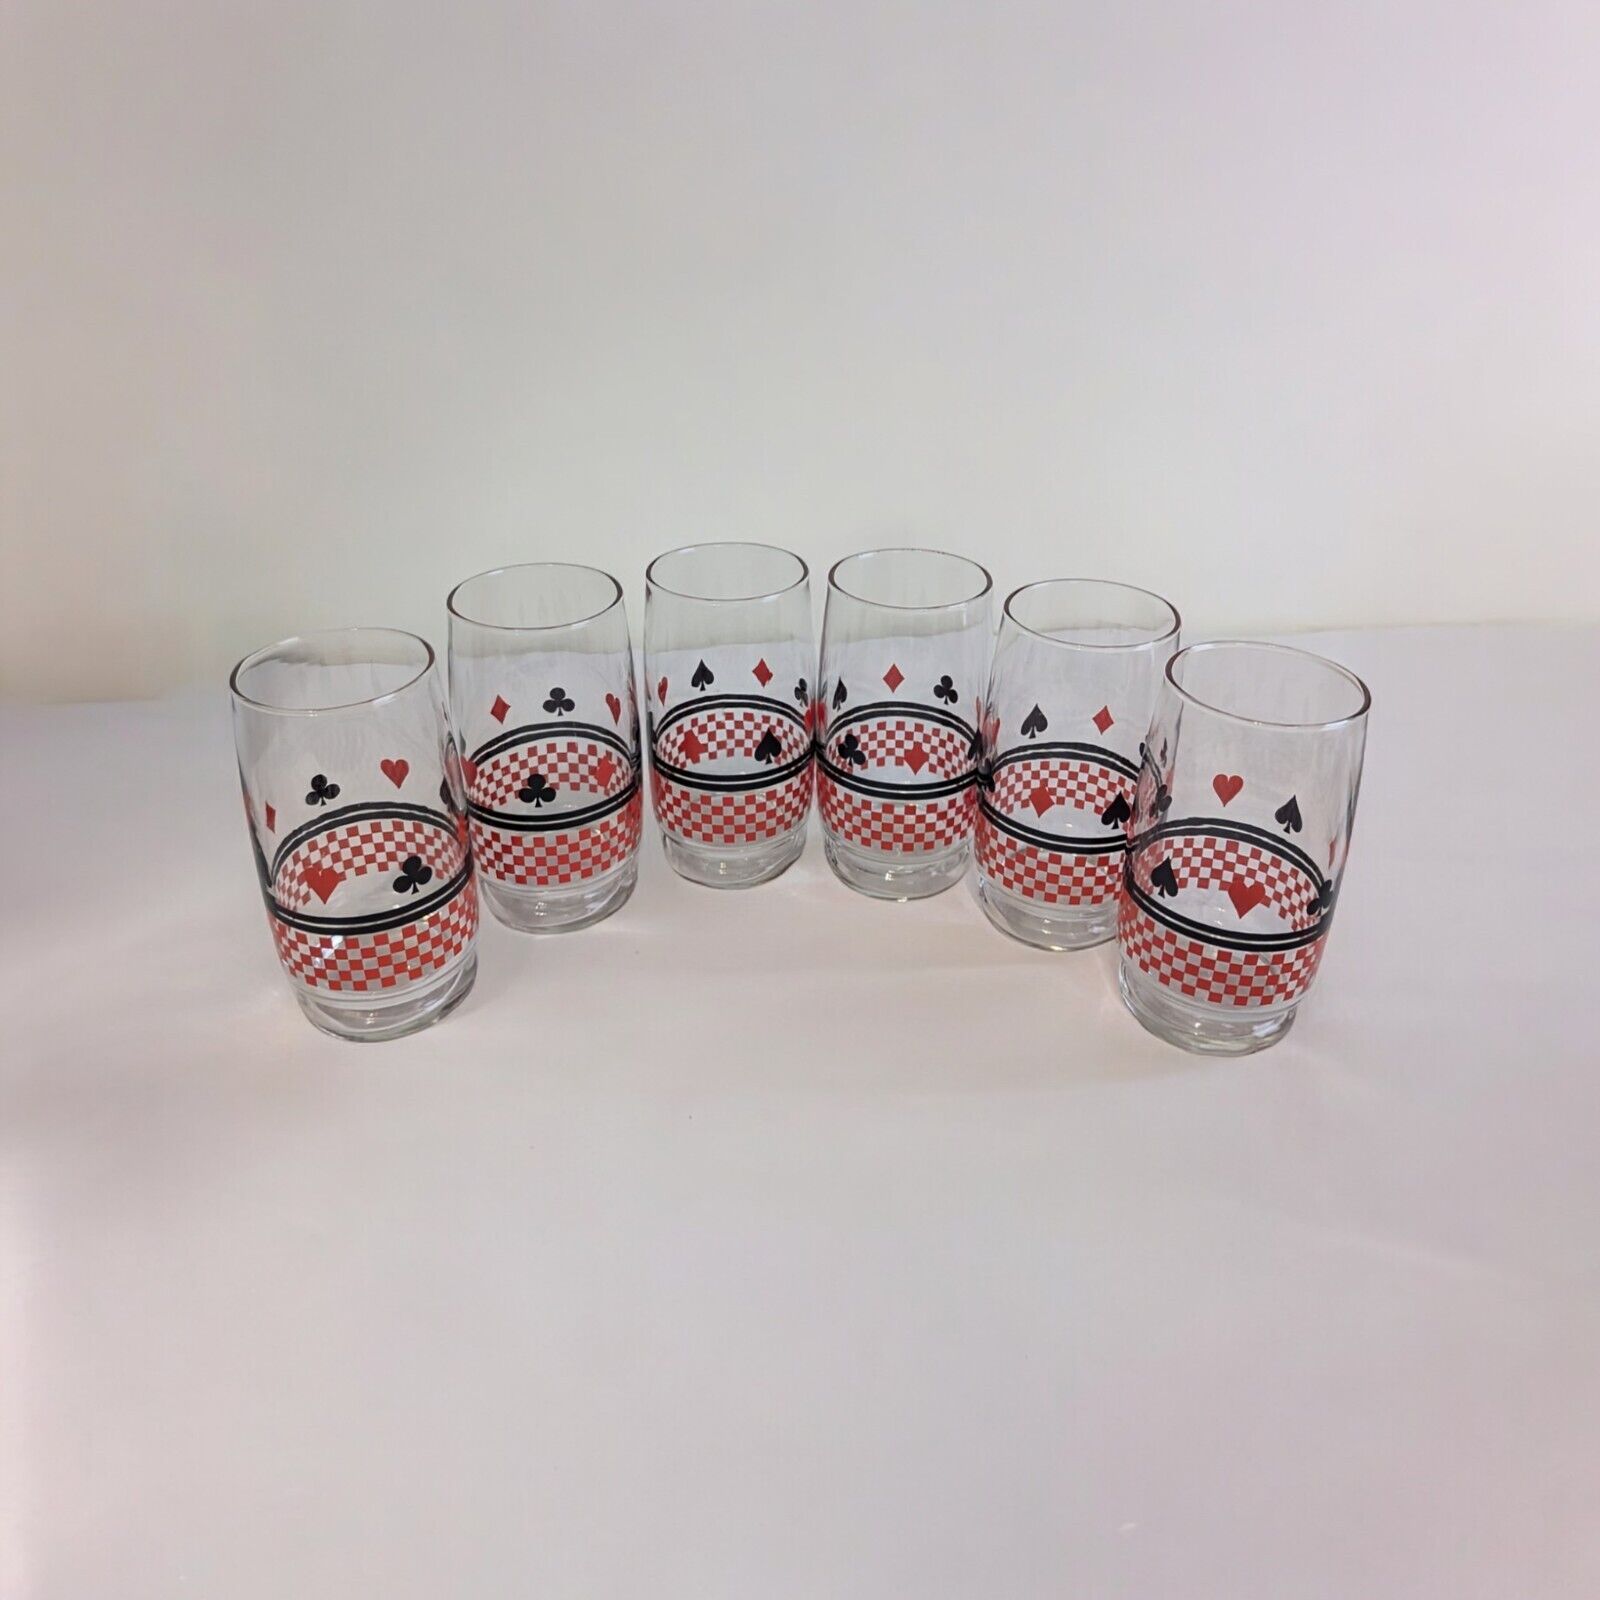 Vintage 1960s Playing Card Suits Patterned Drinking Glasses - Set of 6